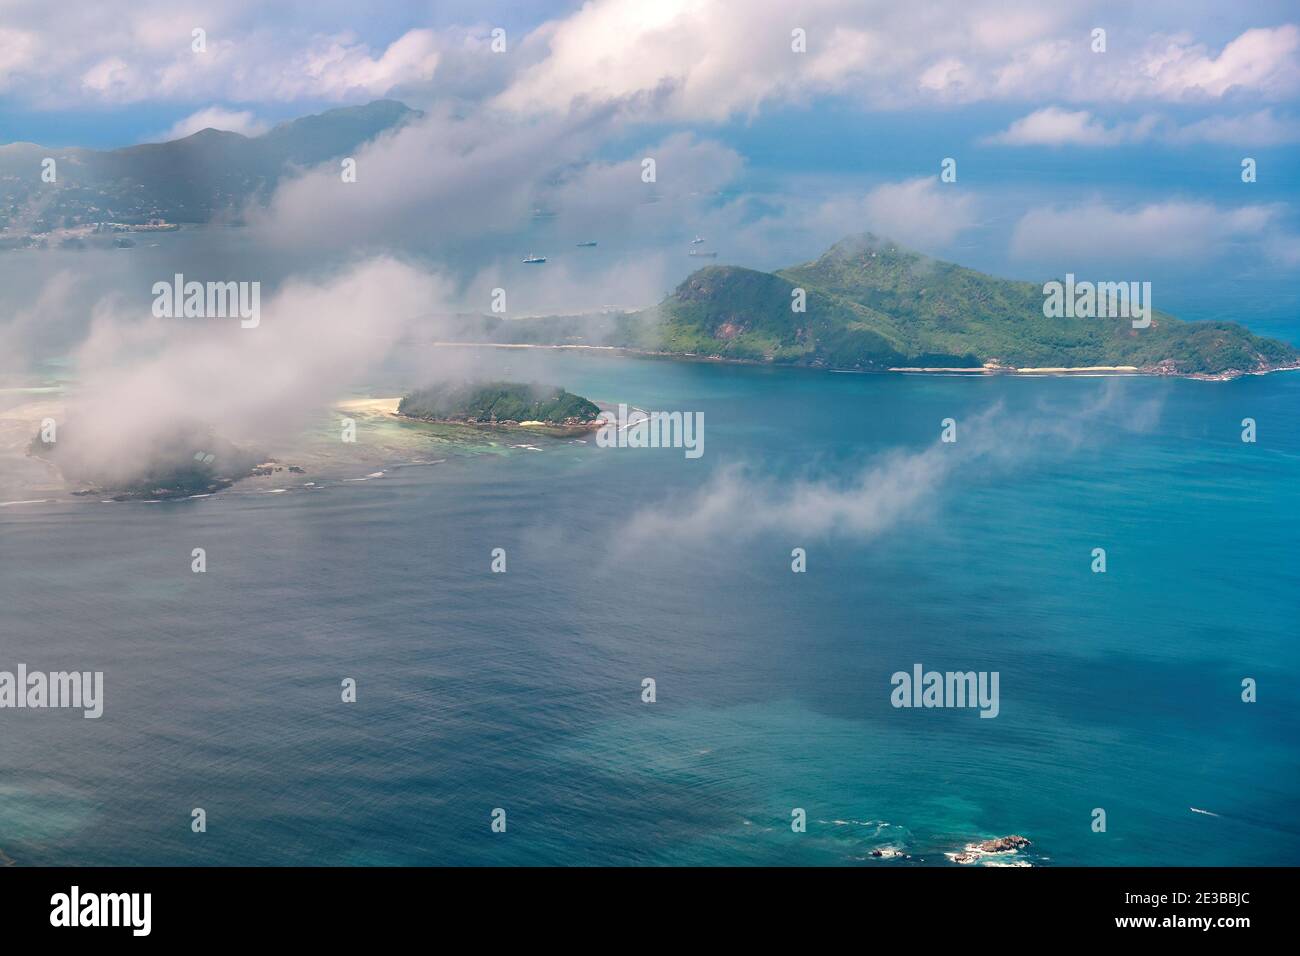 Aerial view of tropical Island in the ocean Stock Photo